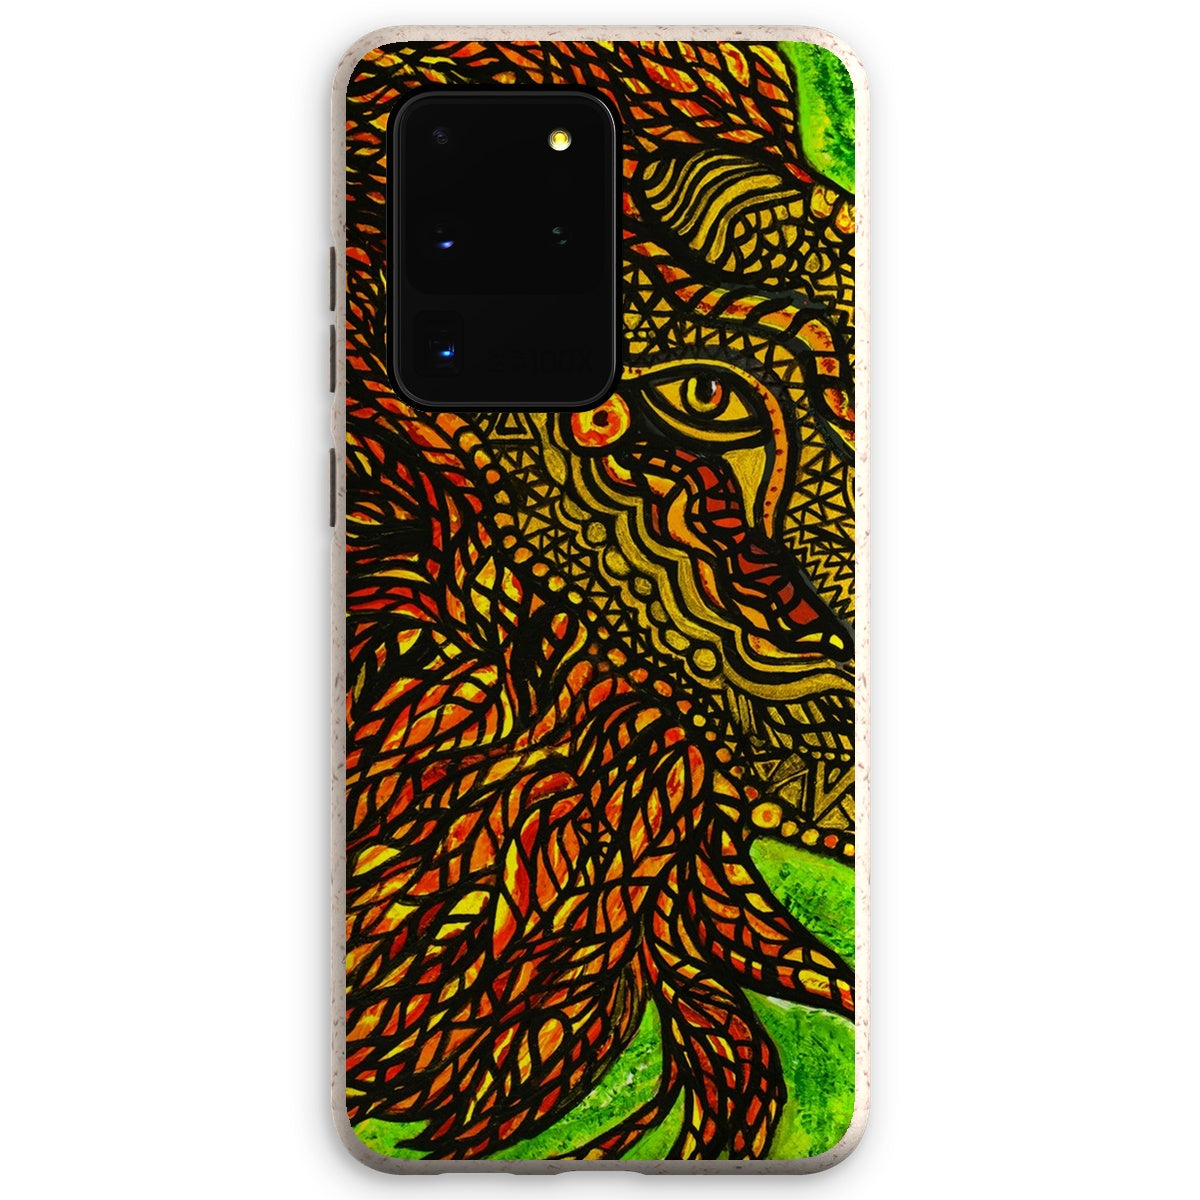 The Lions Match Eco Phone Case